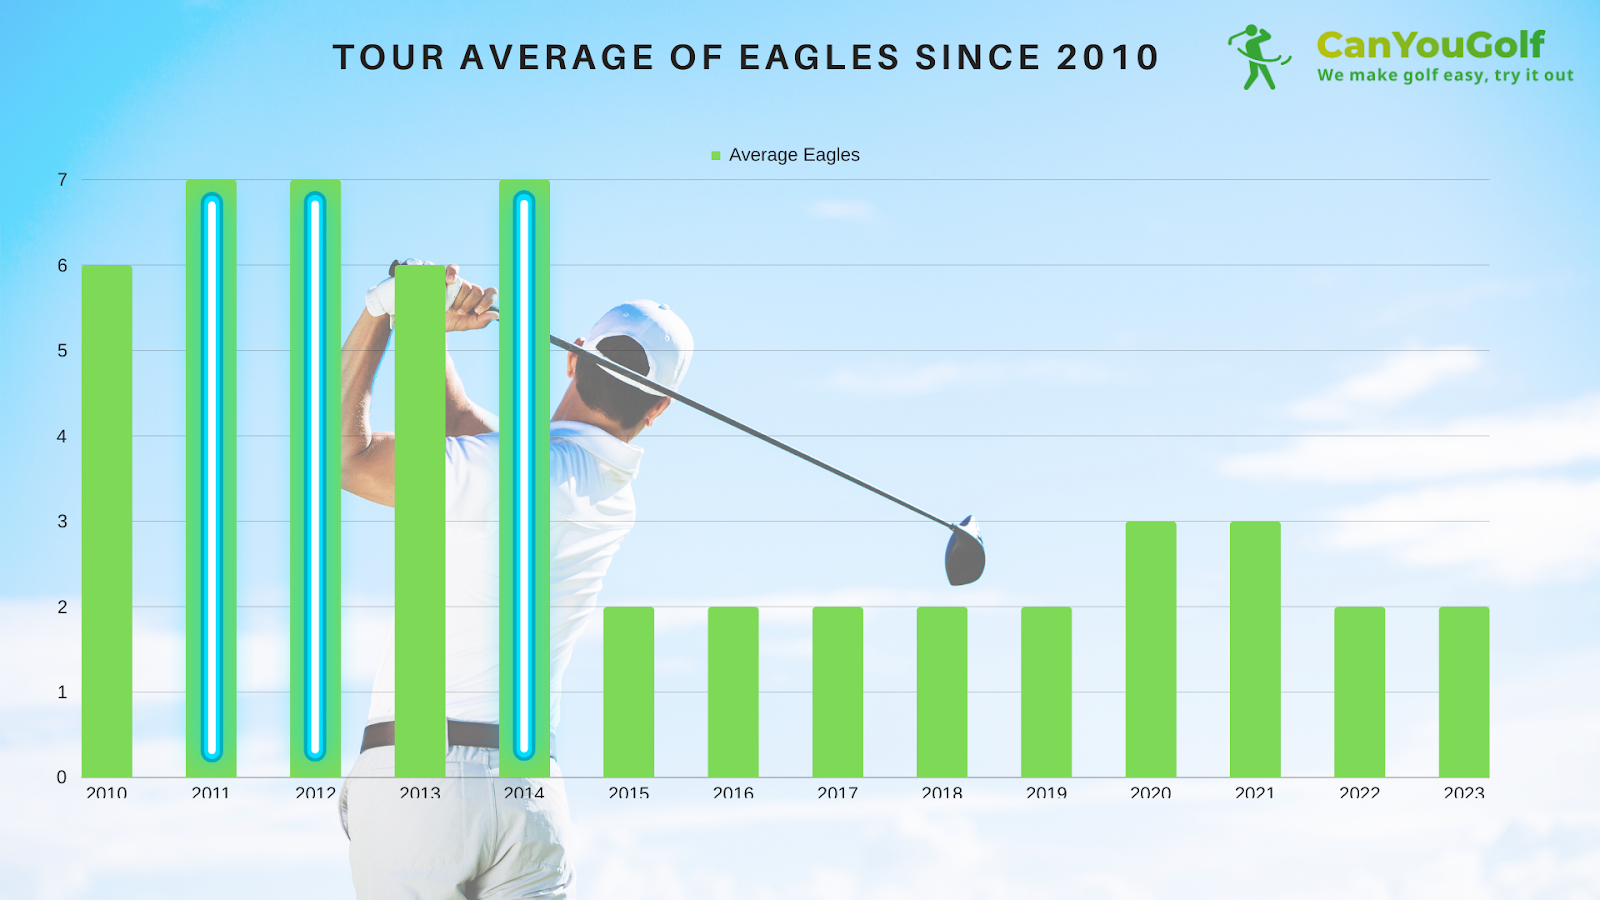 Tour Average of Eagles since 2010